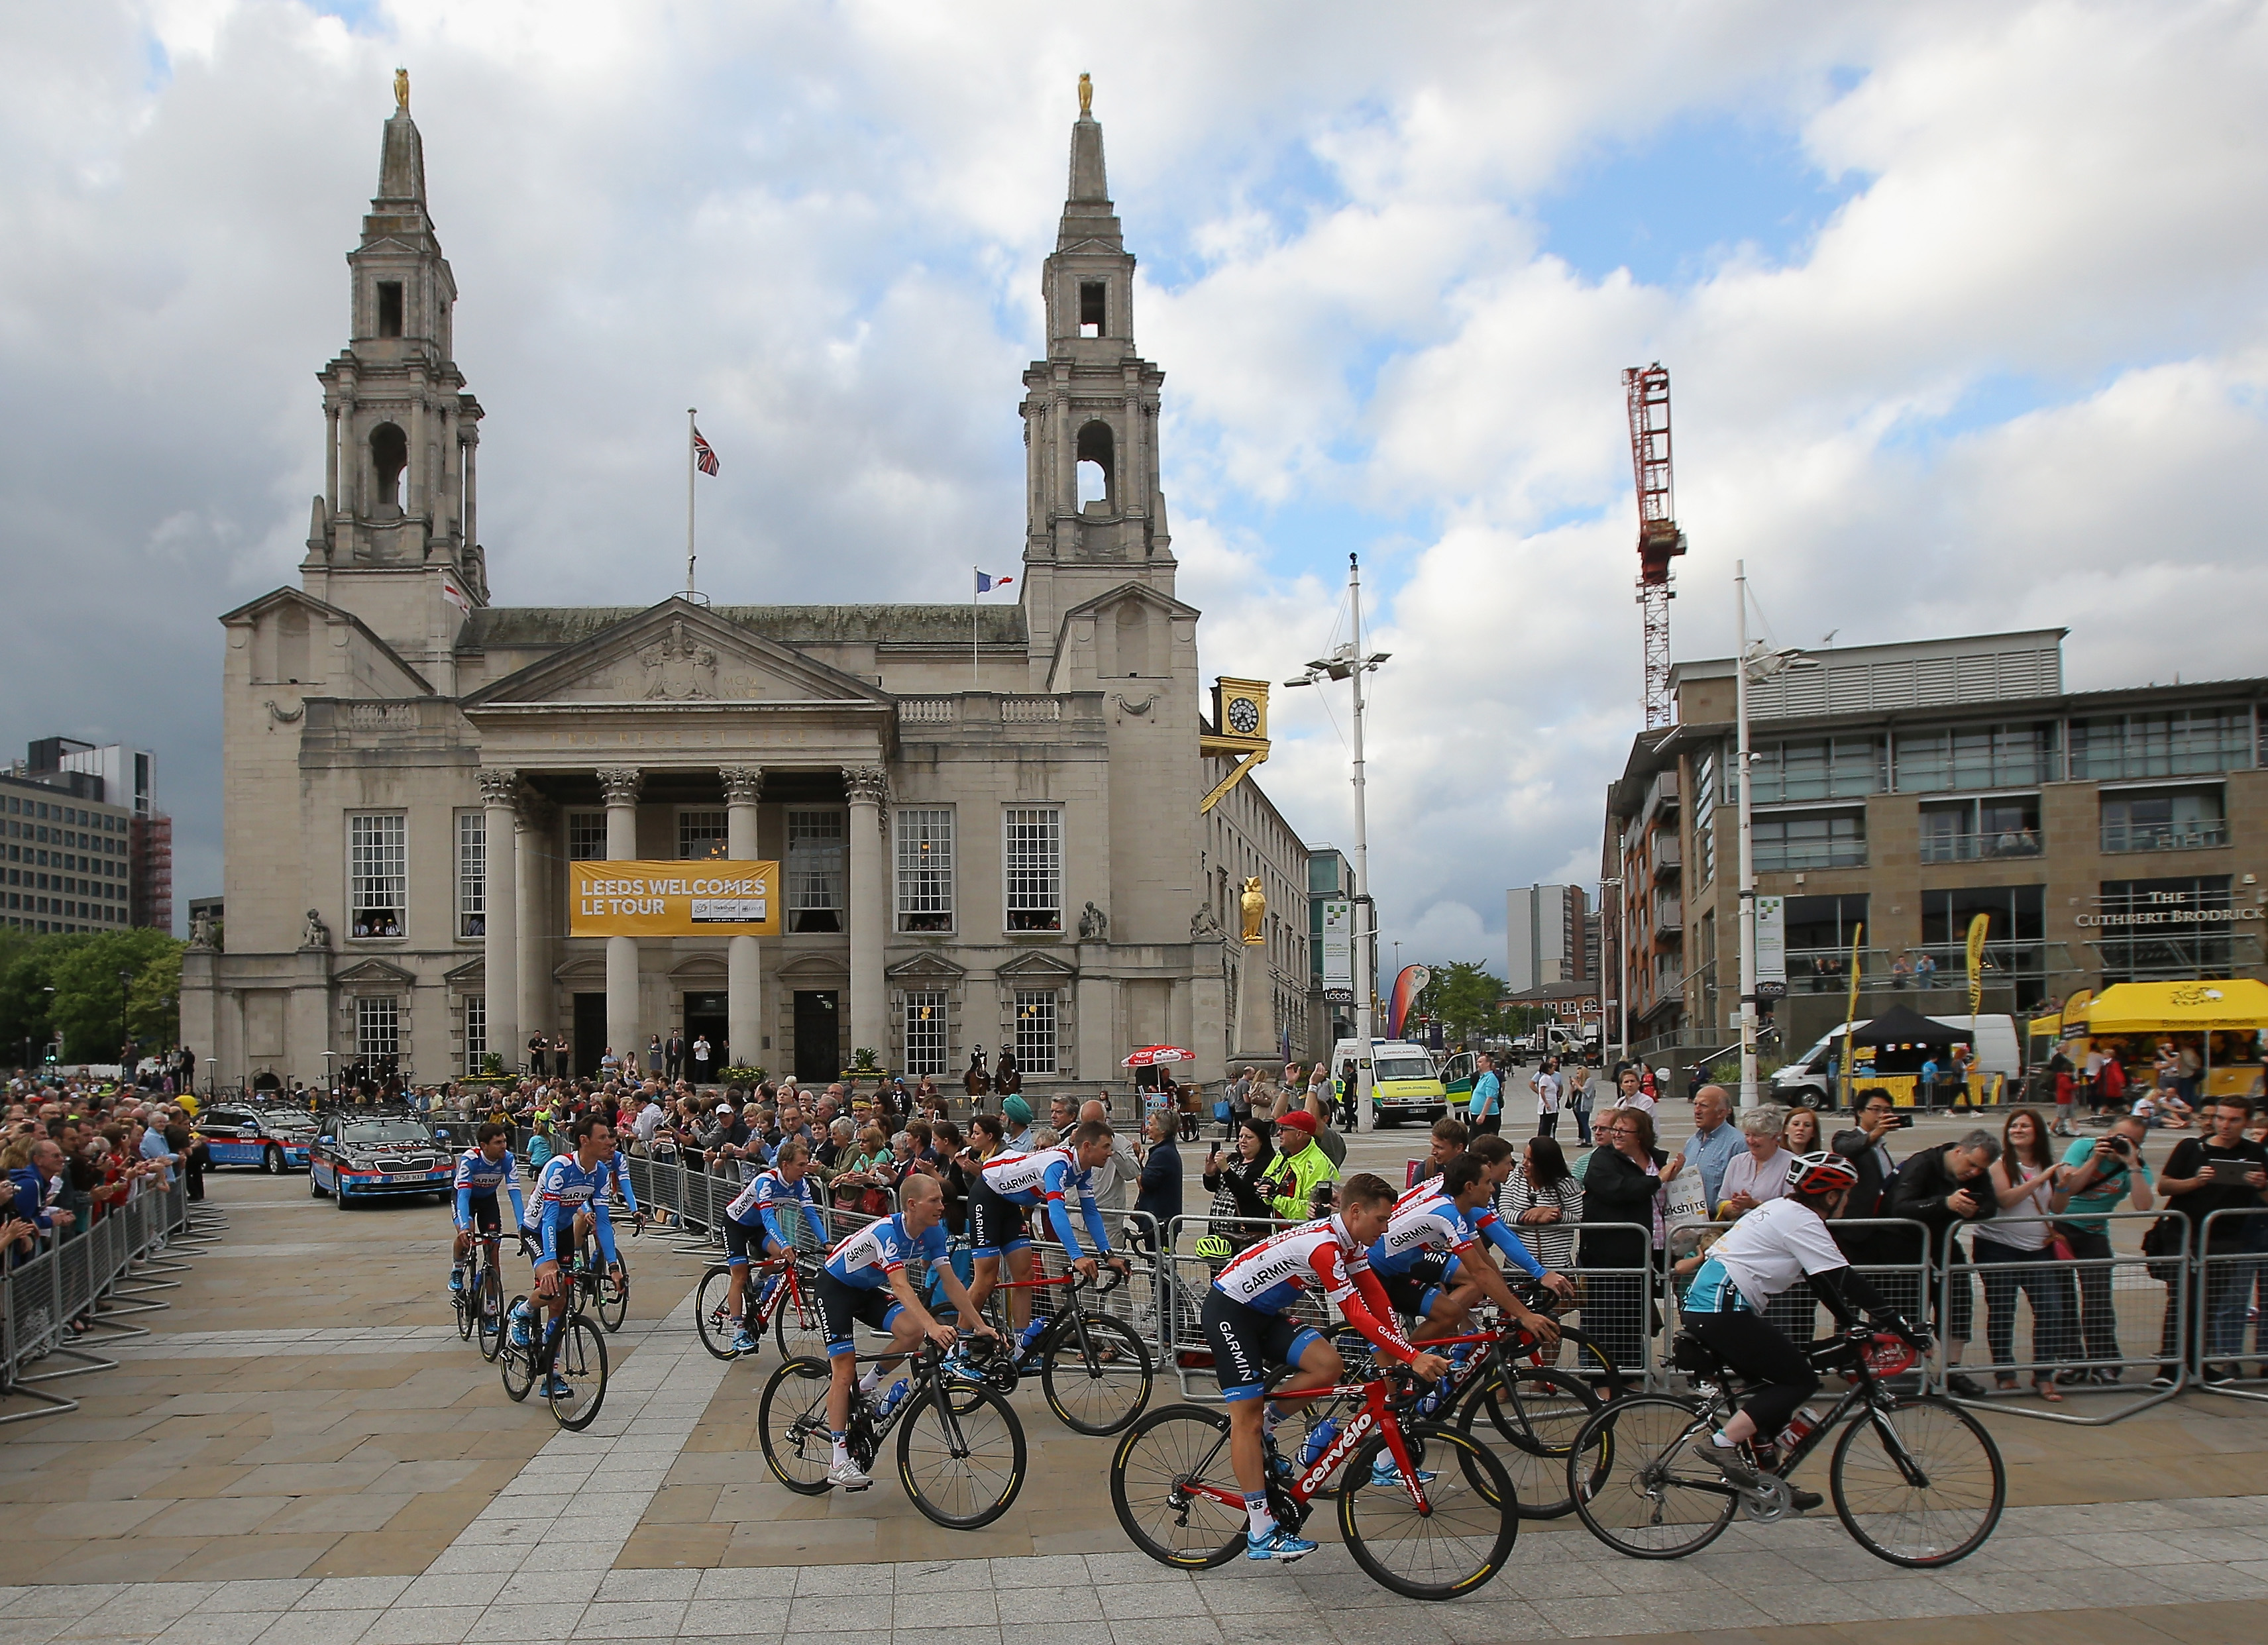 Team Garmin-Sharp is greeted by supporters as they ride through Millenium Square enroute to the Team Presentation prior to the 2014 Le Tour de France on July 3, 2014 in Leeds, United Kingdom. (Doug Pensinger—Getty Images)